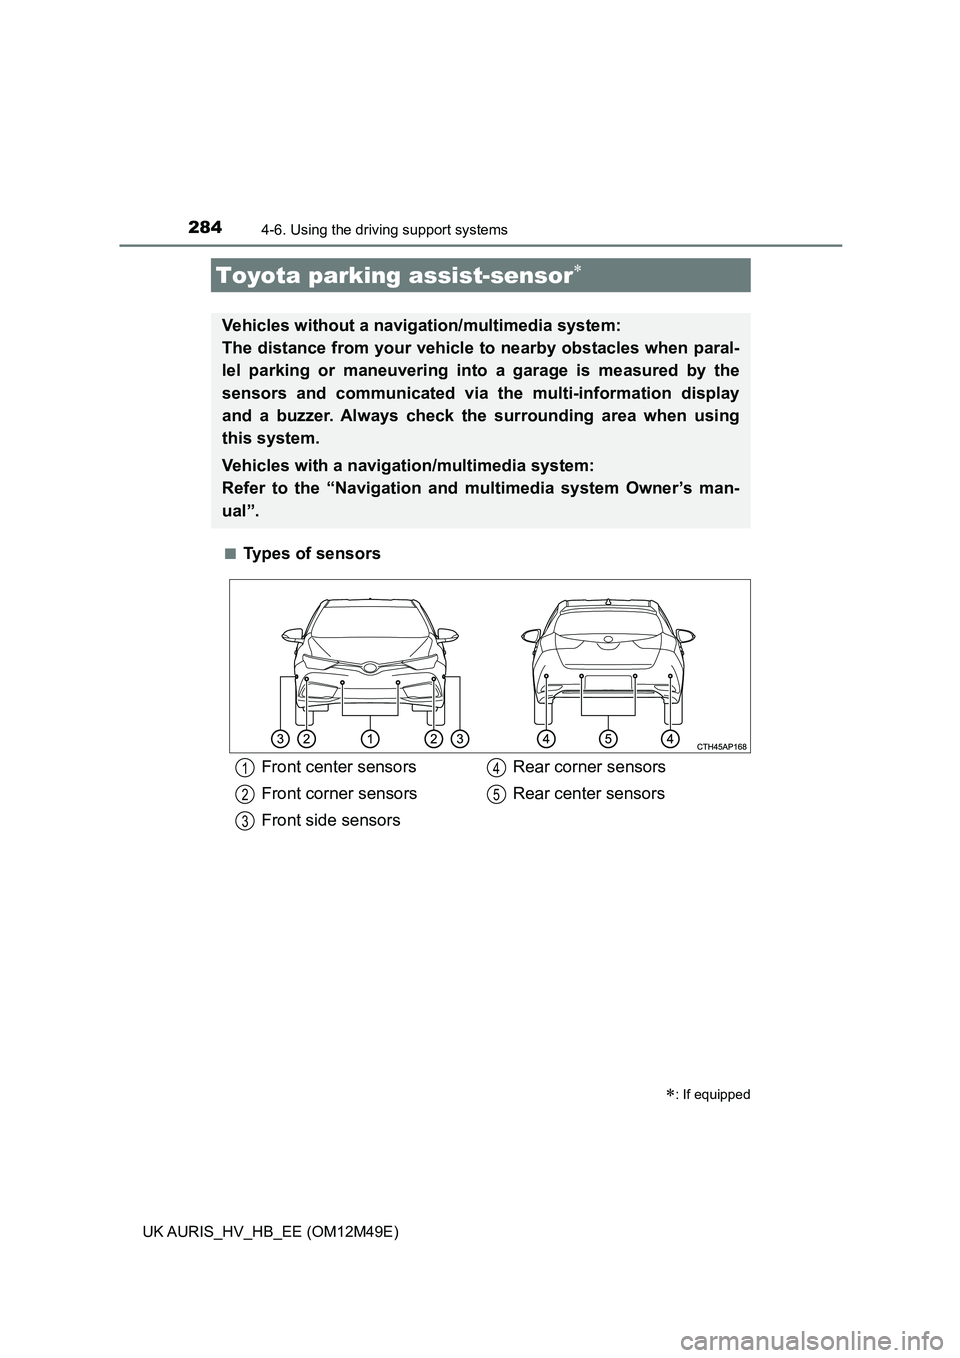 TOYOTA AURIS 2018  Owners Manual (in English) 2844-6. Using the driving support systems
UK AURIS_HV_HB_EE (OM12M49E) 
■Types of sensors
Toyota parking  assist-sensor
: If equipped
Vehicles without a navigation/multimedia system:  
The dis